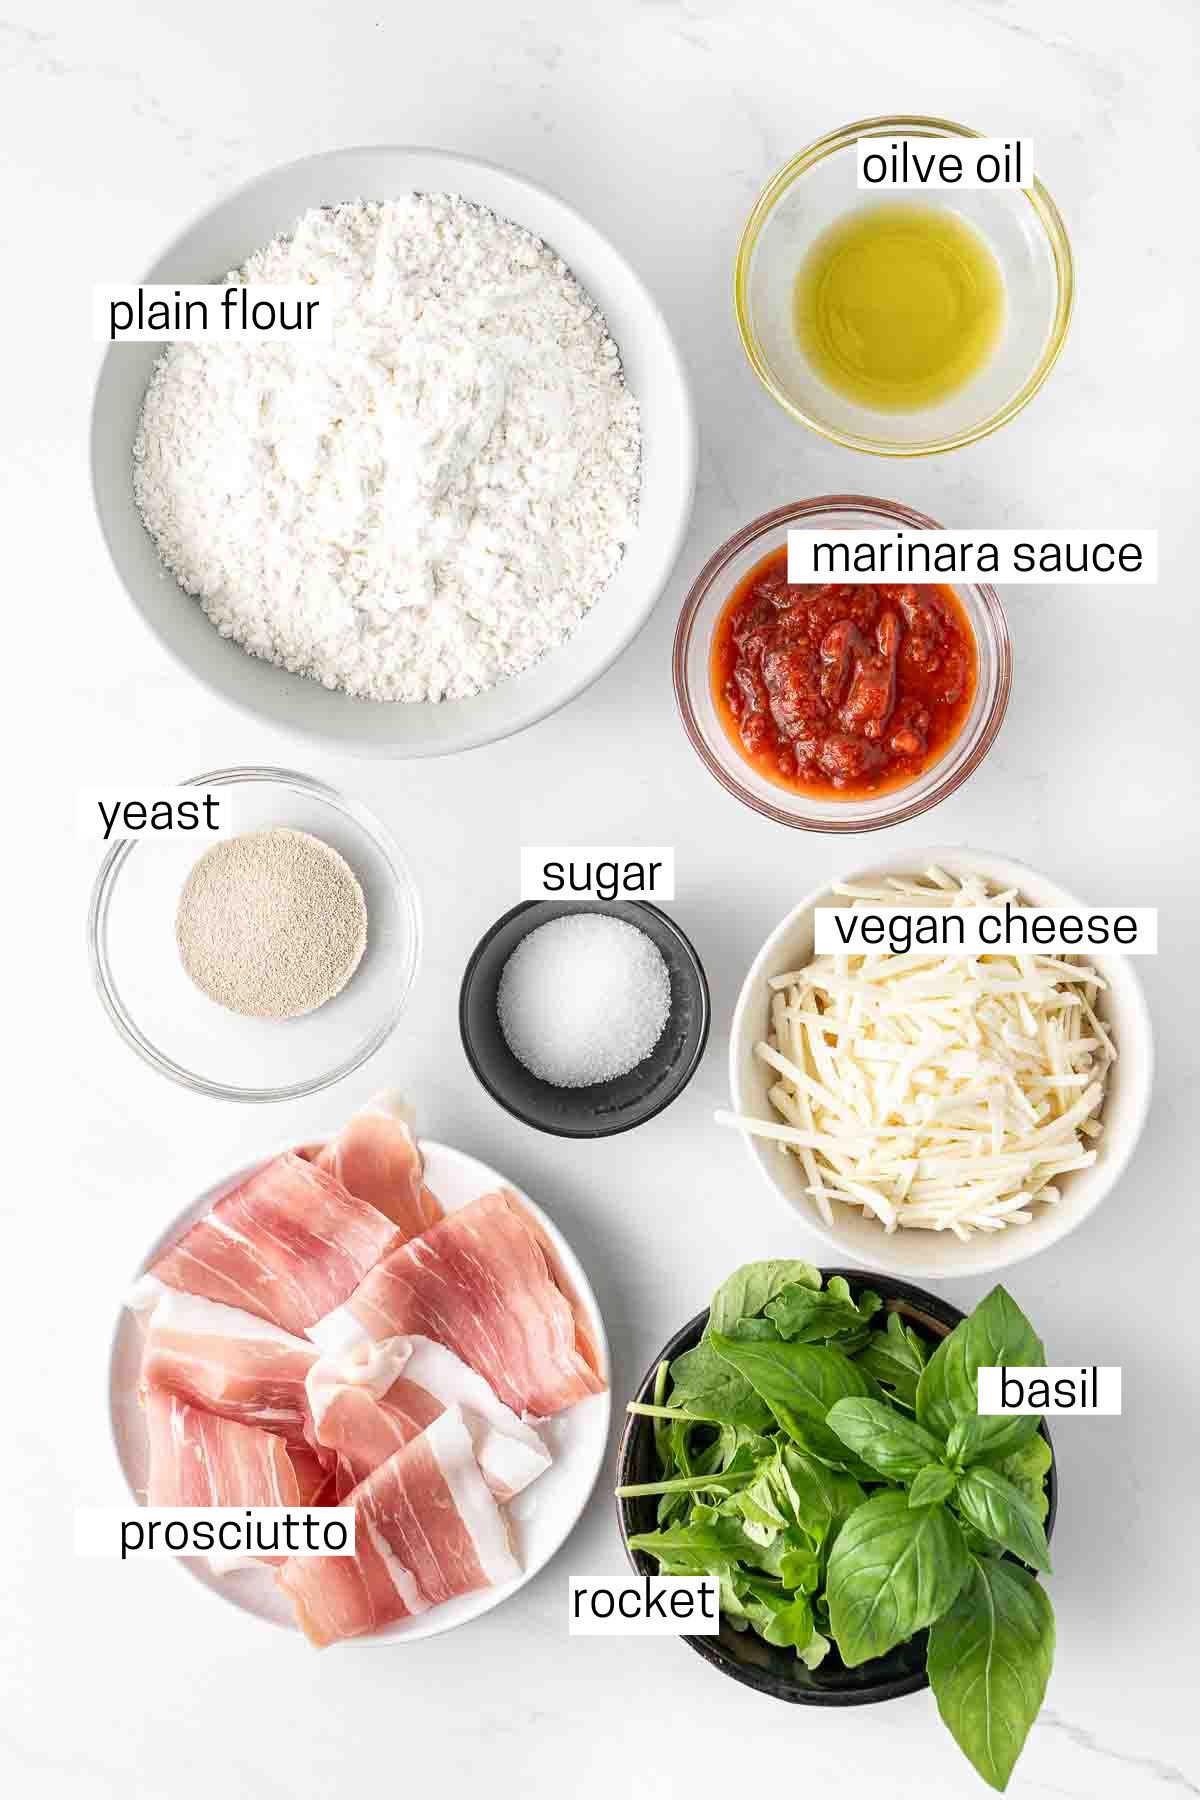 All ingredients needed to make prosciutto pizza laid out in small bowls.